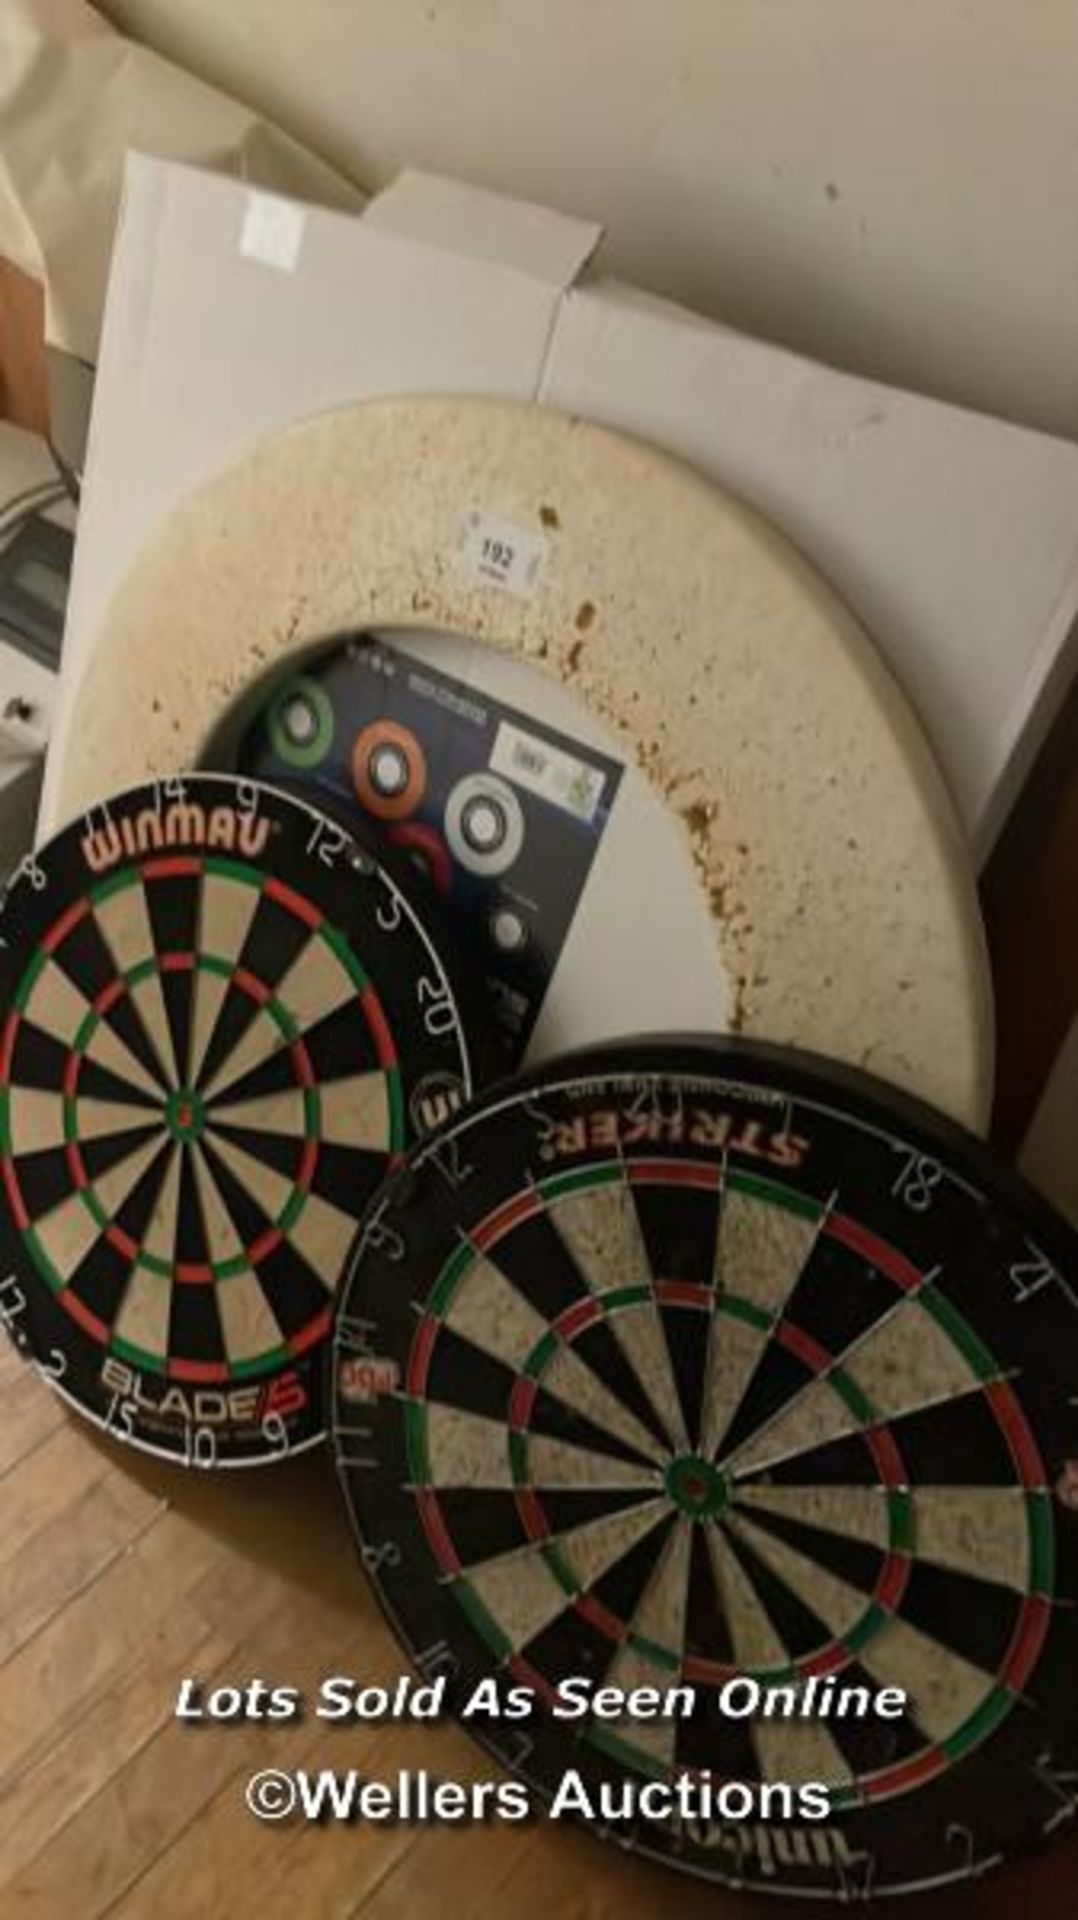 1X WINMAU BLADE 5 AND UNICORN STRIKE DARTBOARDS WITH NEW AND BOXED WINMAU SURROUND, AND ANOTHER /